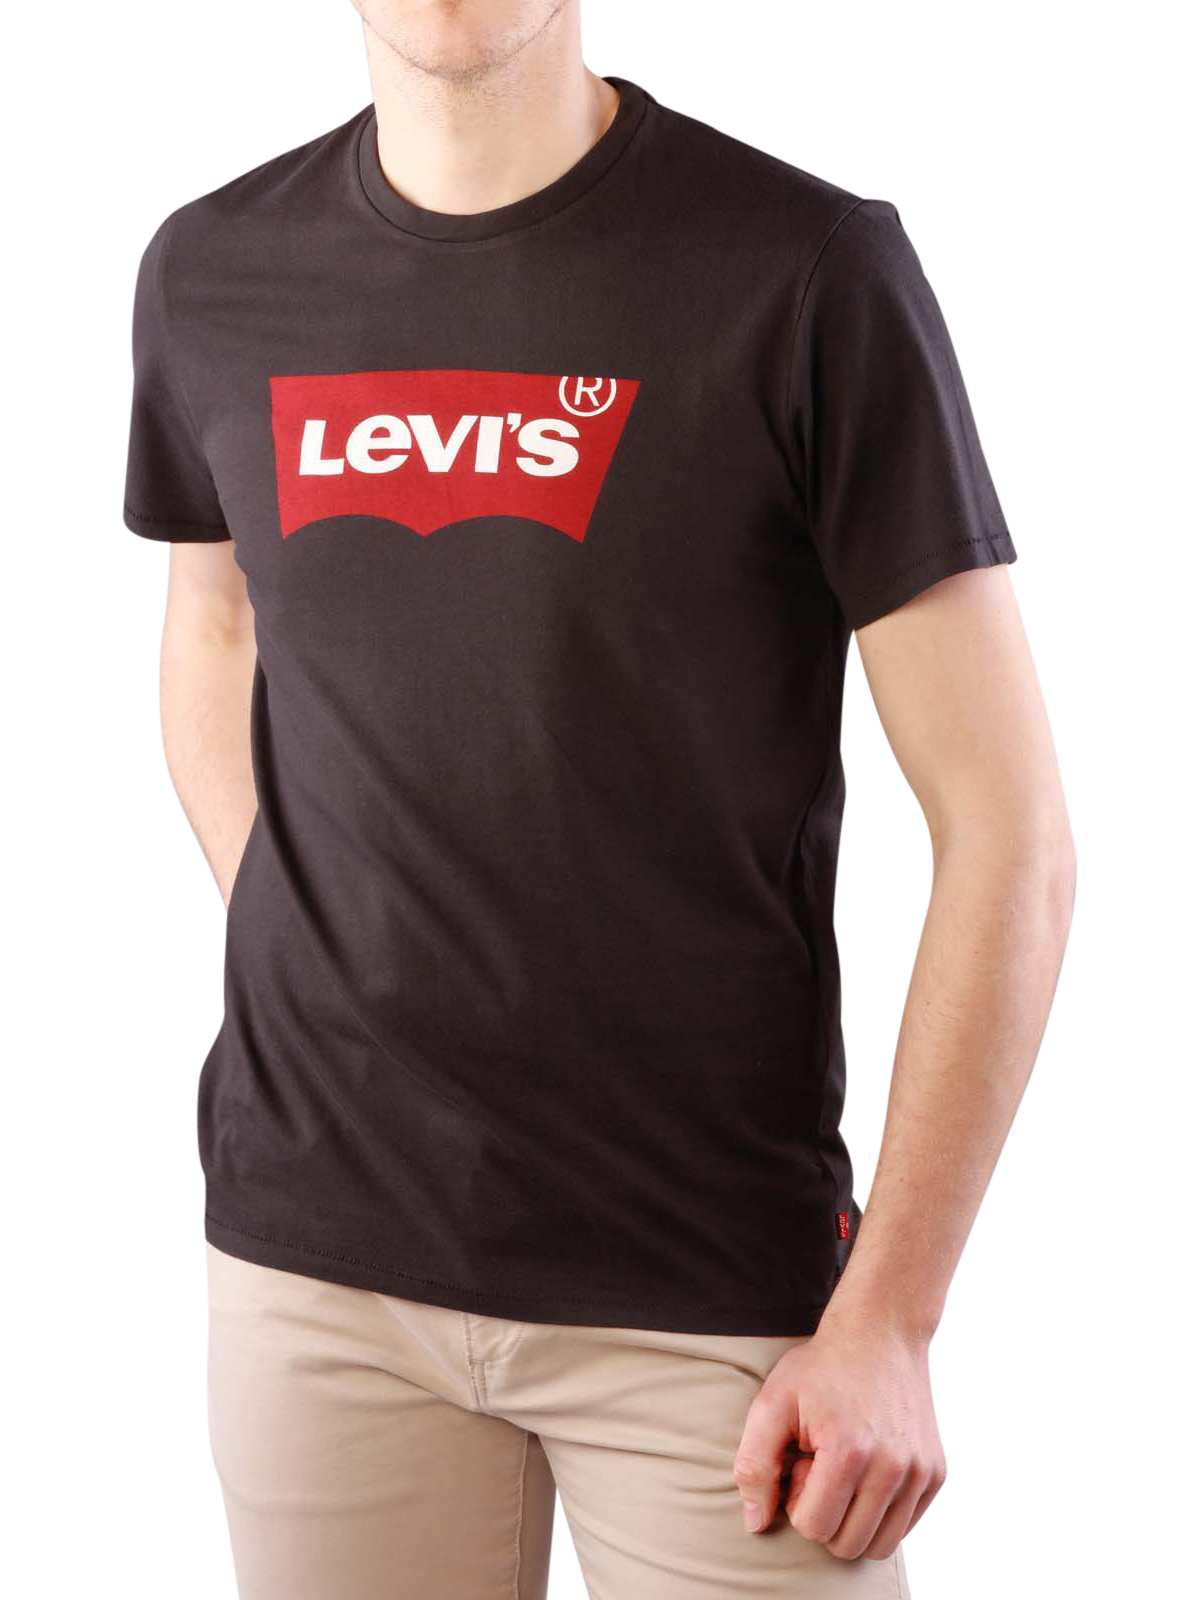 Levis Graphic TShirt black  free shipping  JEANSCH